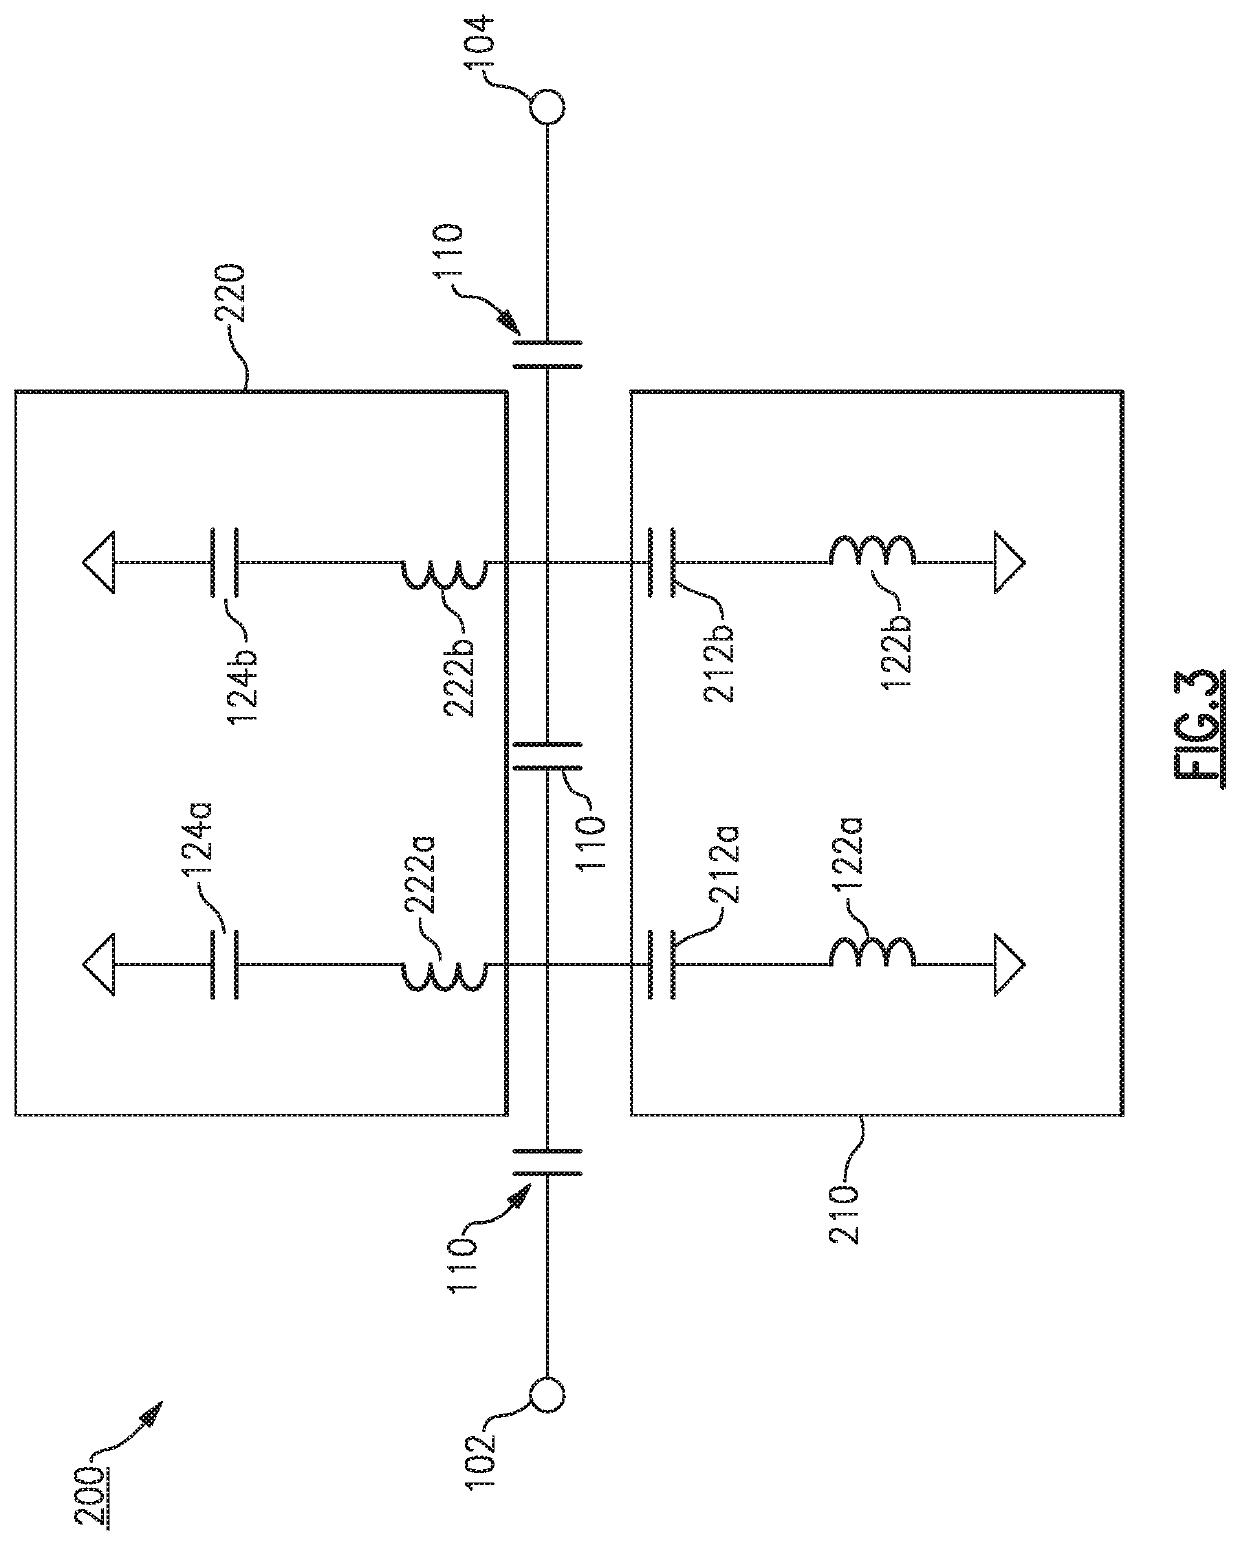 Capacitive-coupled bandpass filter